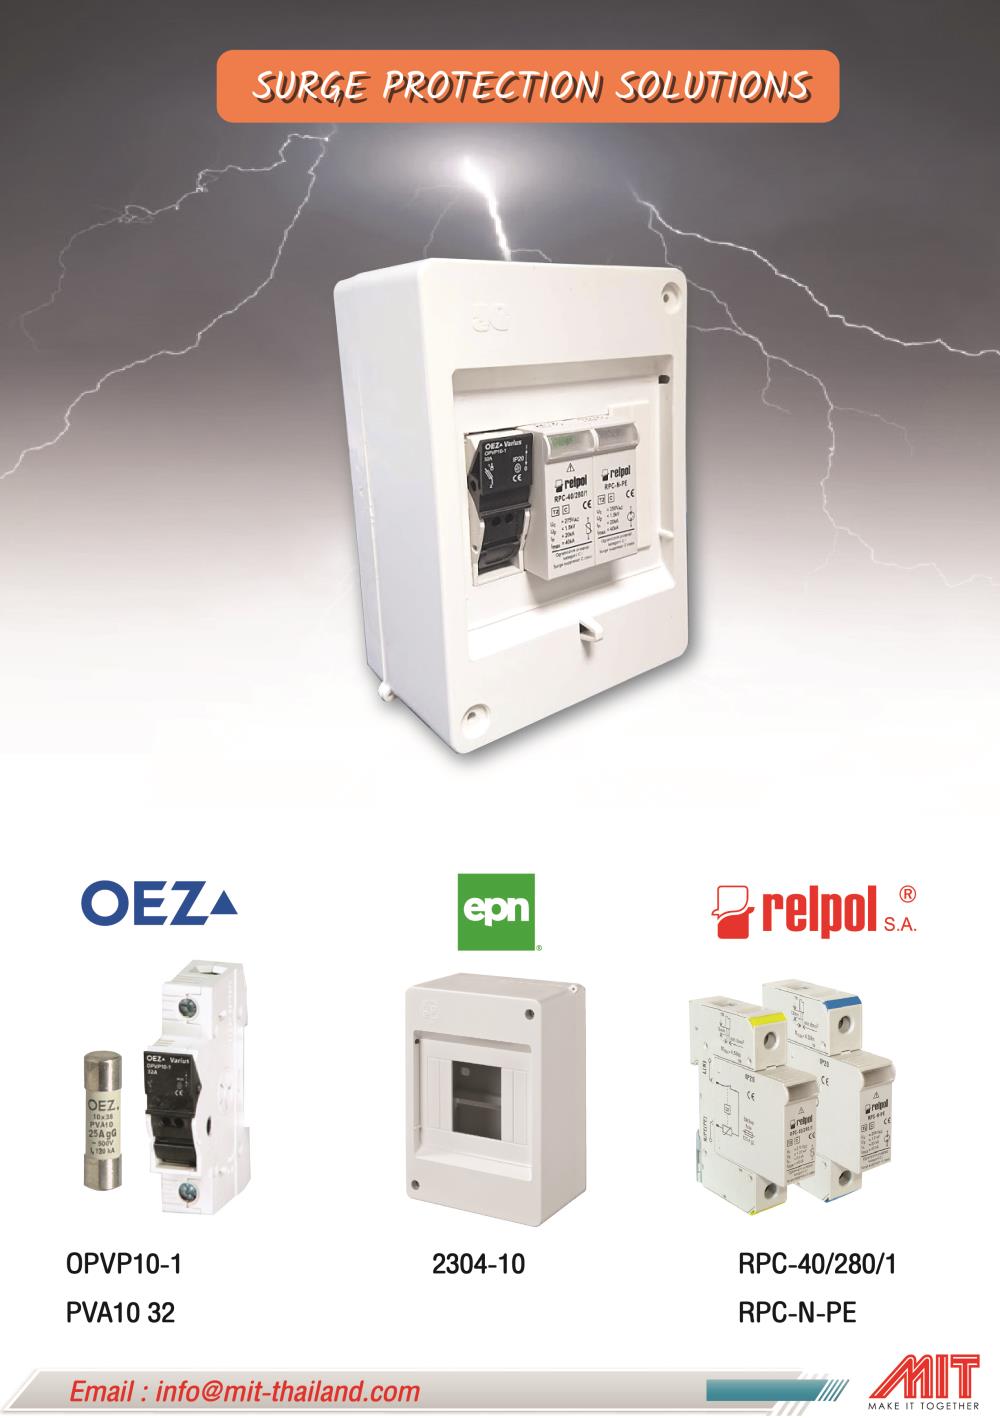 Surge Protection Solutions,Surge Protection Devices,Relpol, OEZ, EPN,Electrical and Power Generation/Electrical Components/Surge Protector